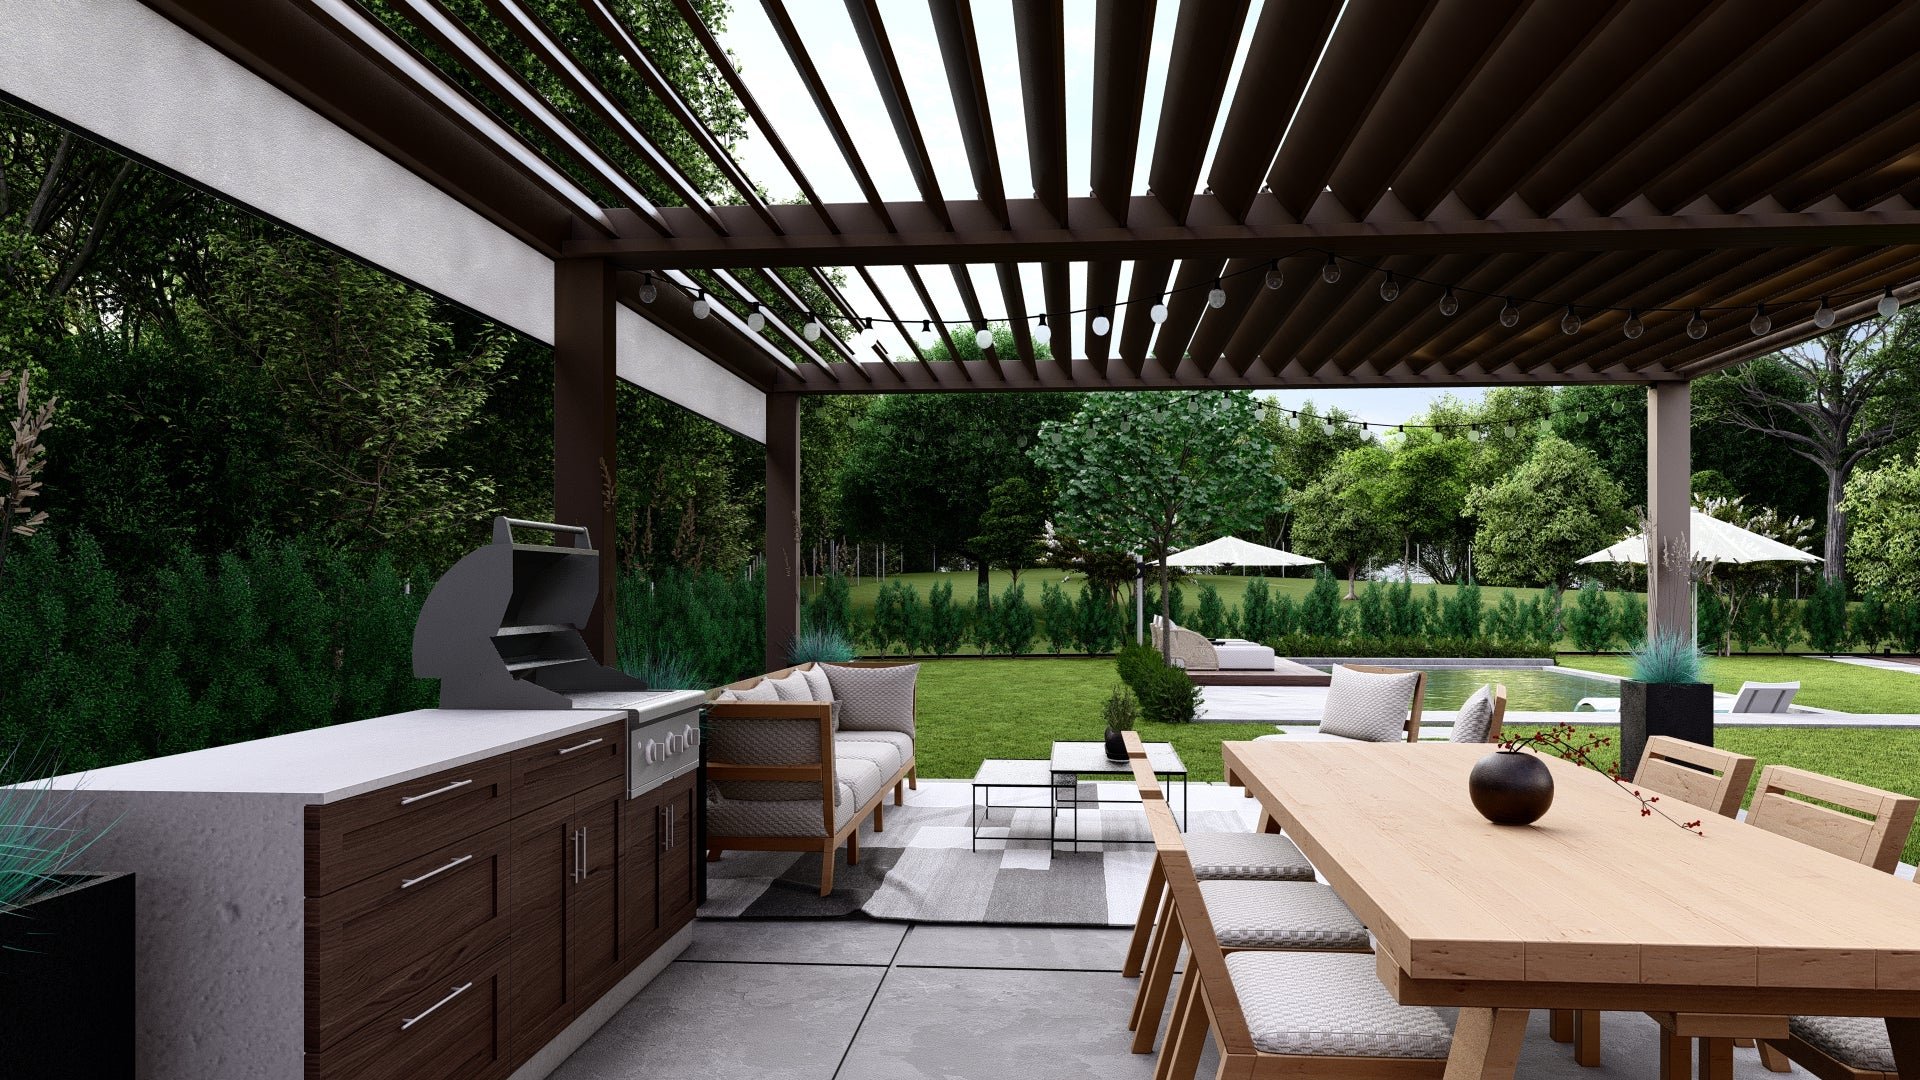 This backyard design for our client in Martinez, CA pairs the Merida table with dining side chairs from the same collection that have cushion covers made from Sunbrella fabric.